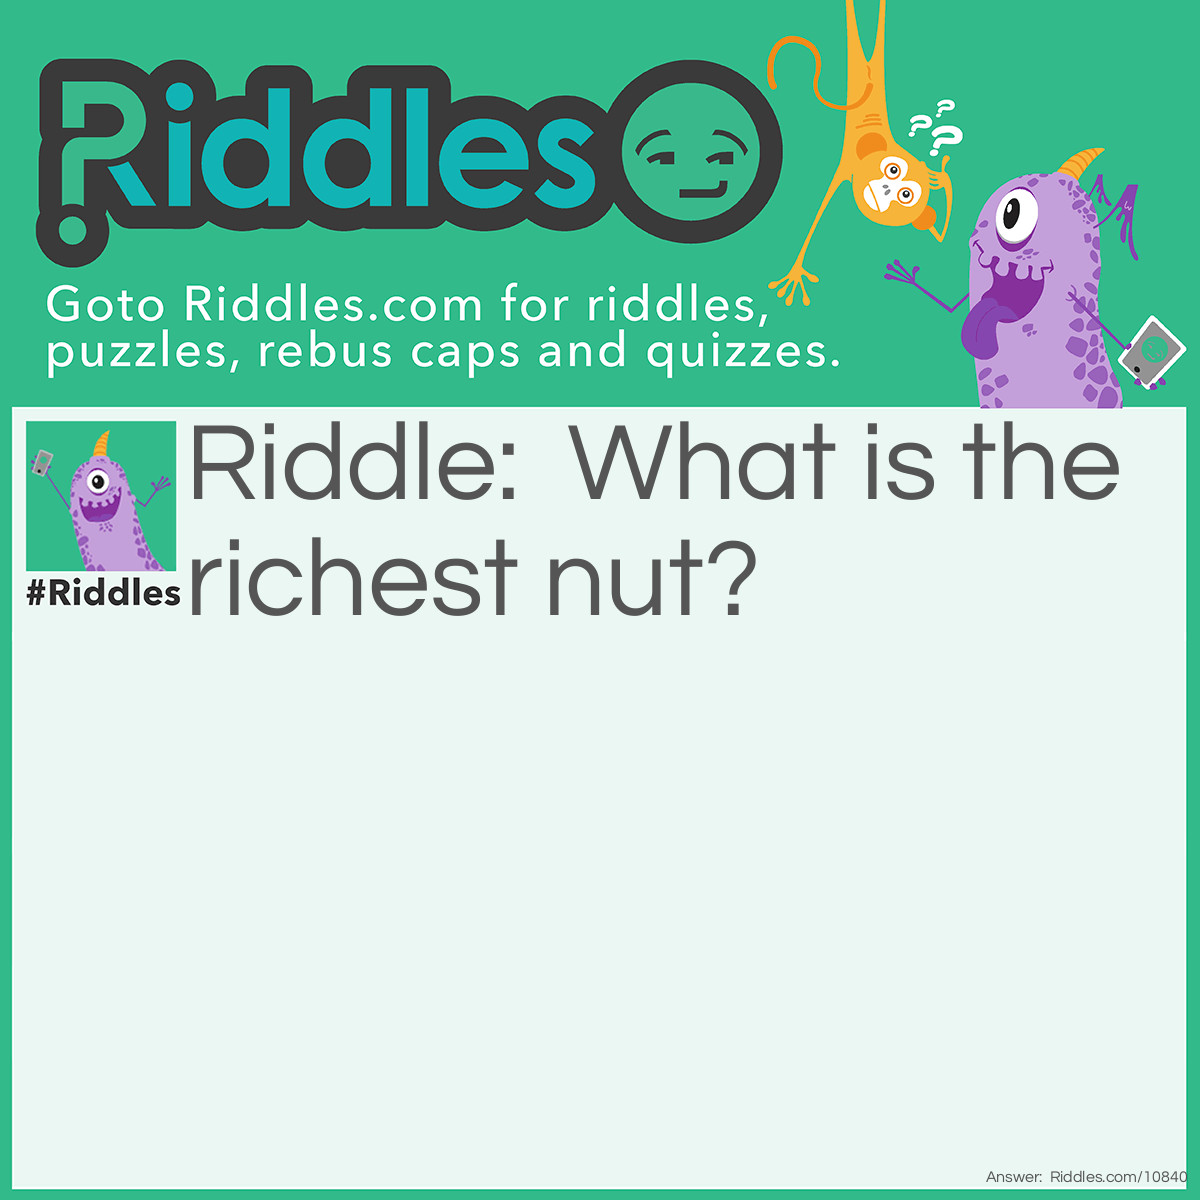 Riddle: What is the richest nut? Answer: Cash-ew nut.